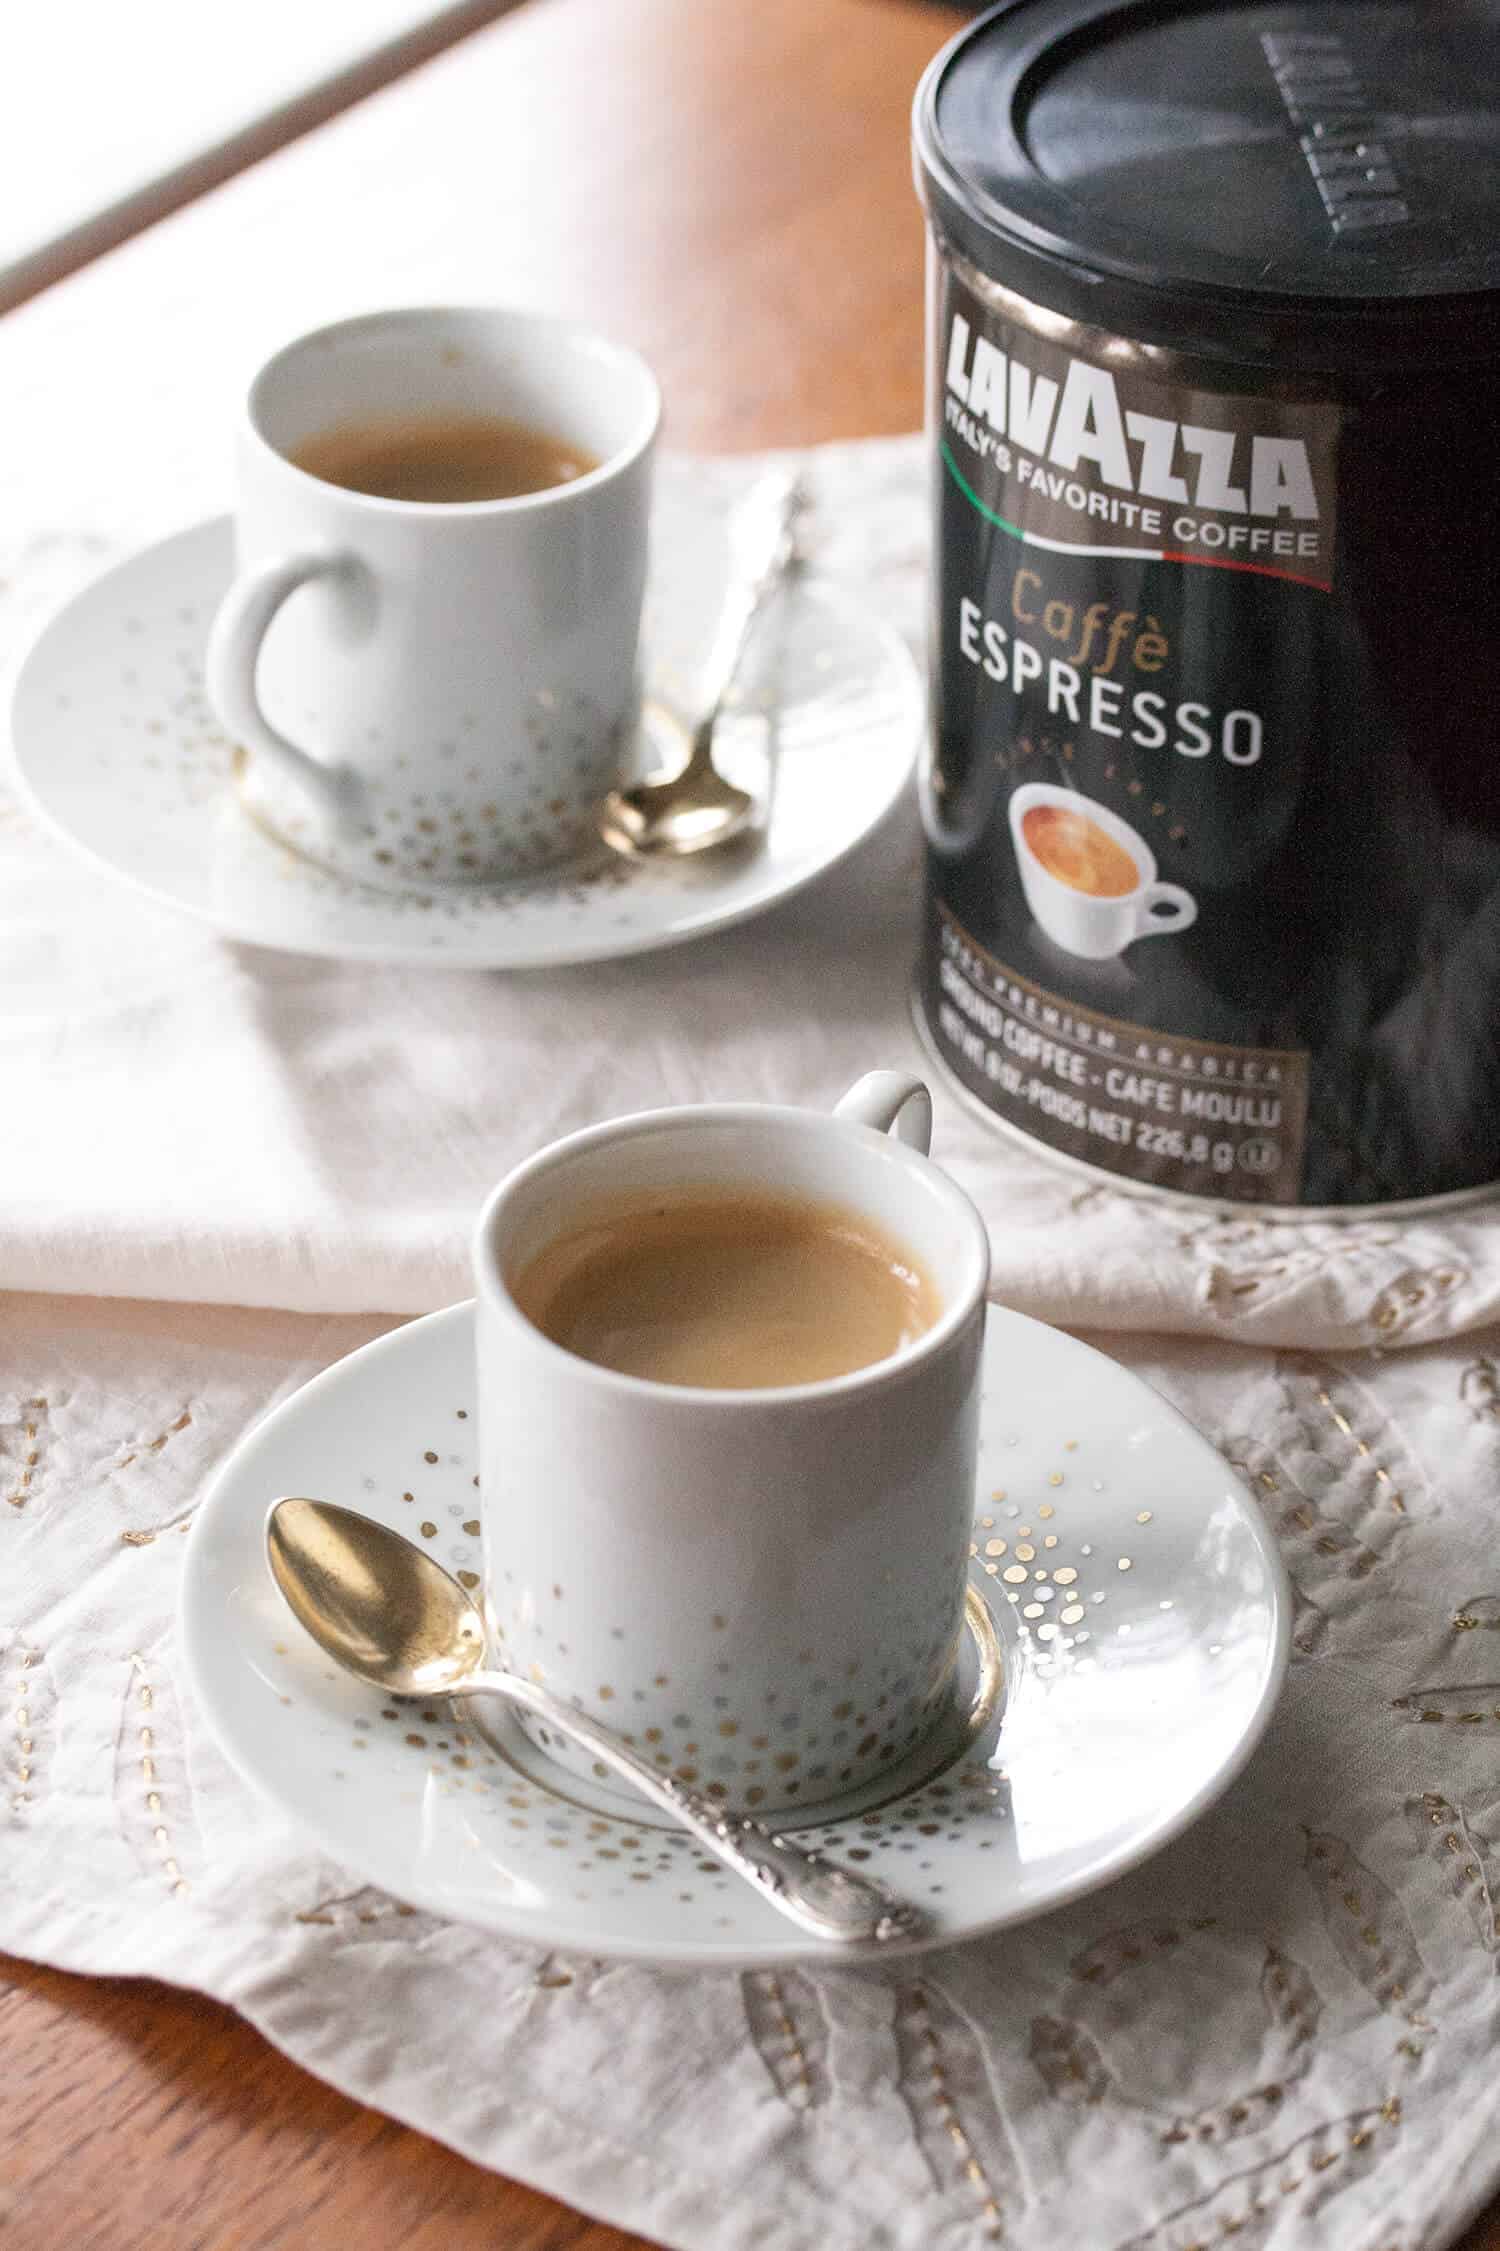 11 Best Espresso Cups to Buy in 2019 - Unique Espresso Cups & Saucer Sets